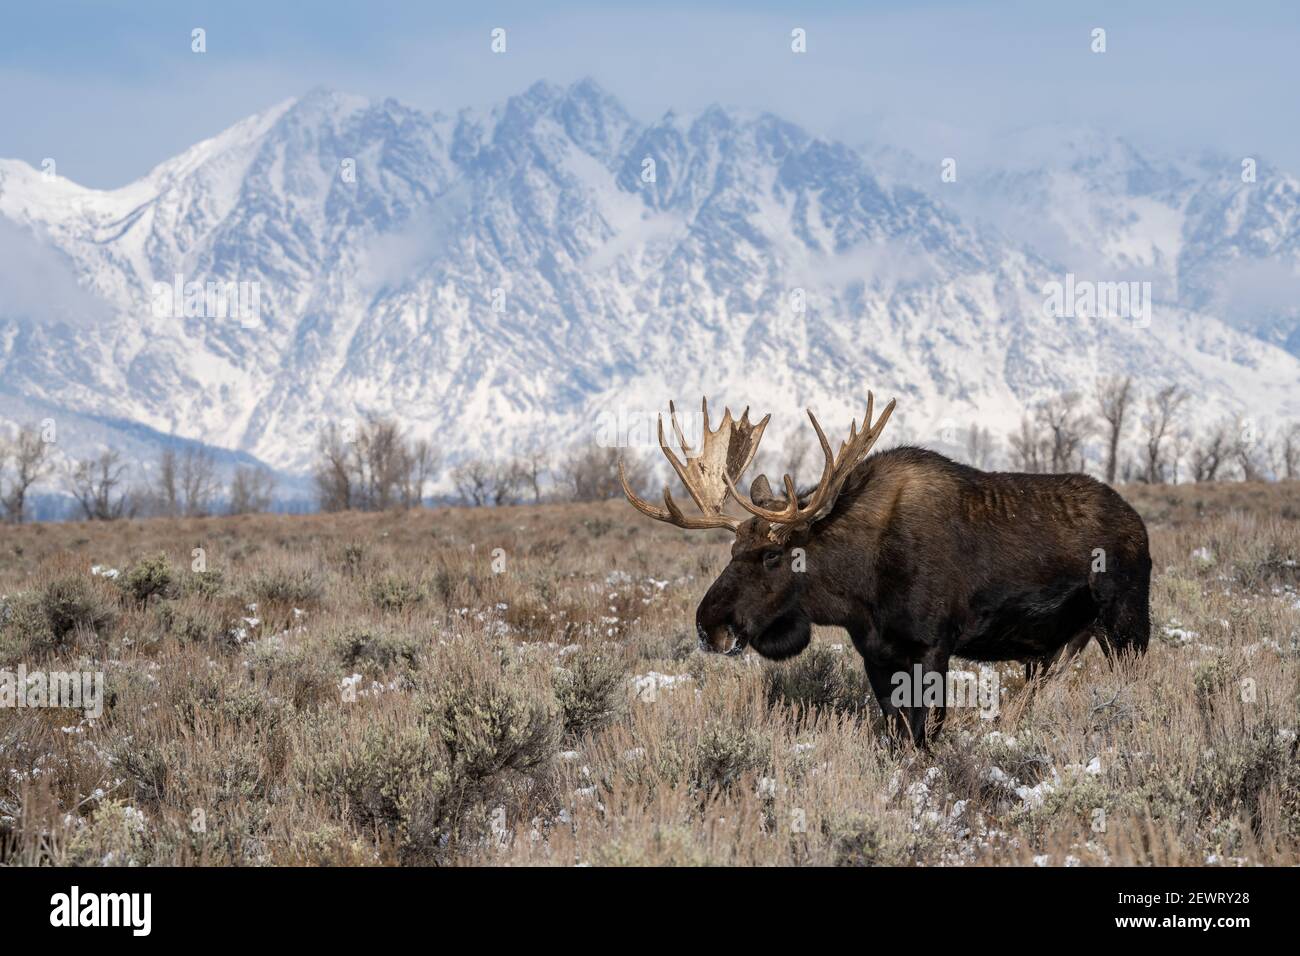 Bull moose (Alces alces), standing in front of Teton Range, Grand Teton National Park, Wyoming, United States of America, North America Stock Photo